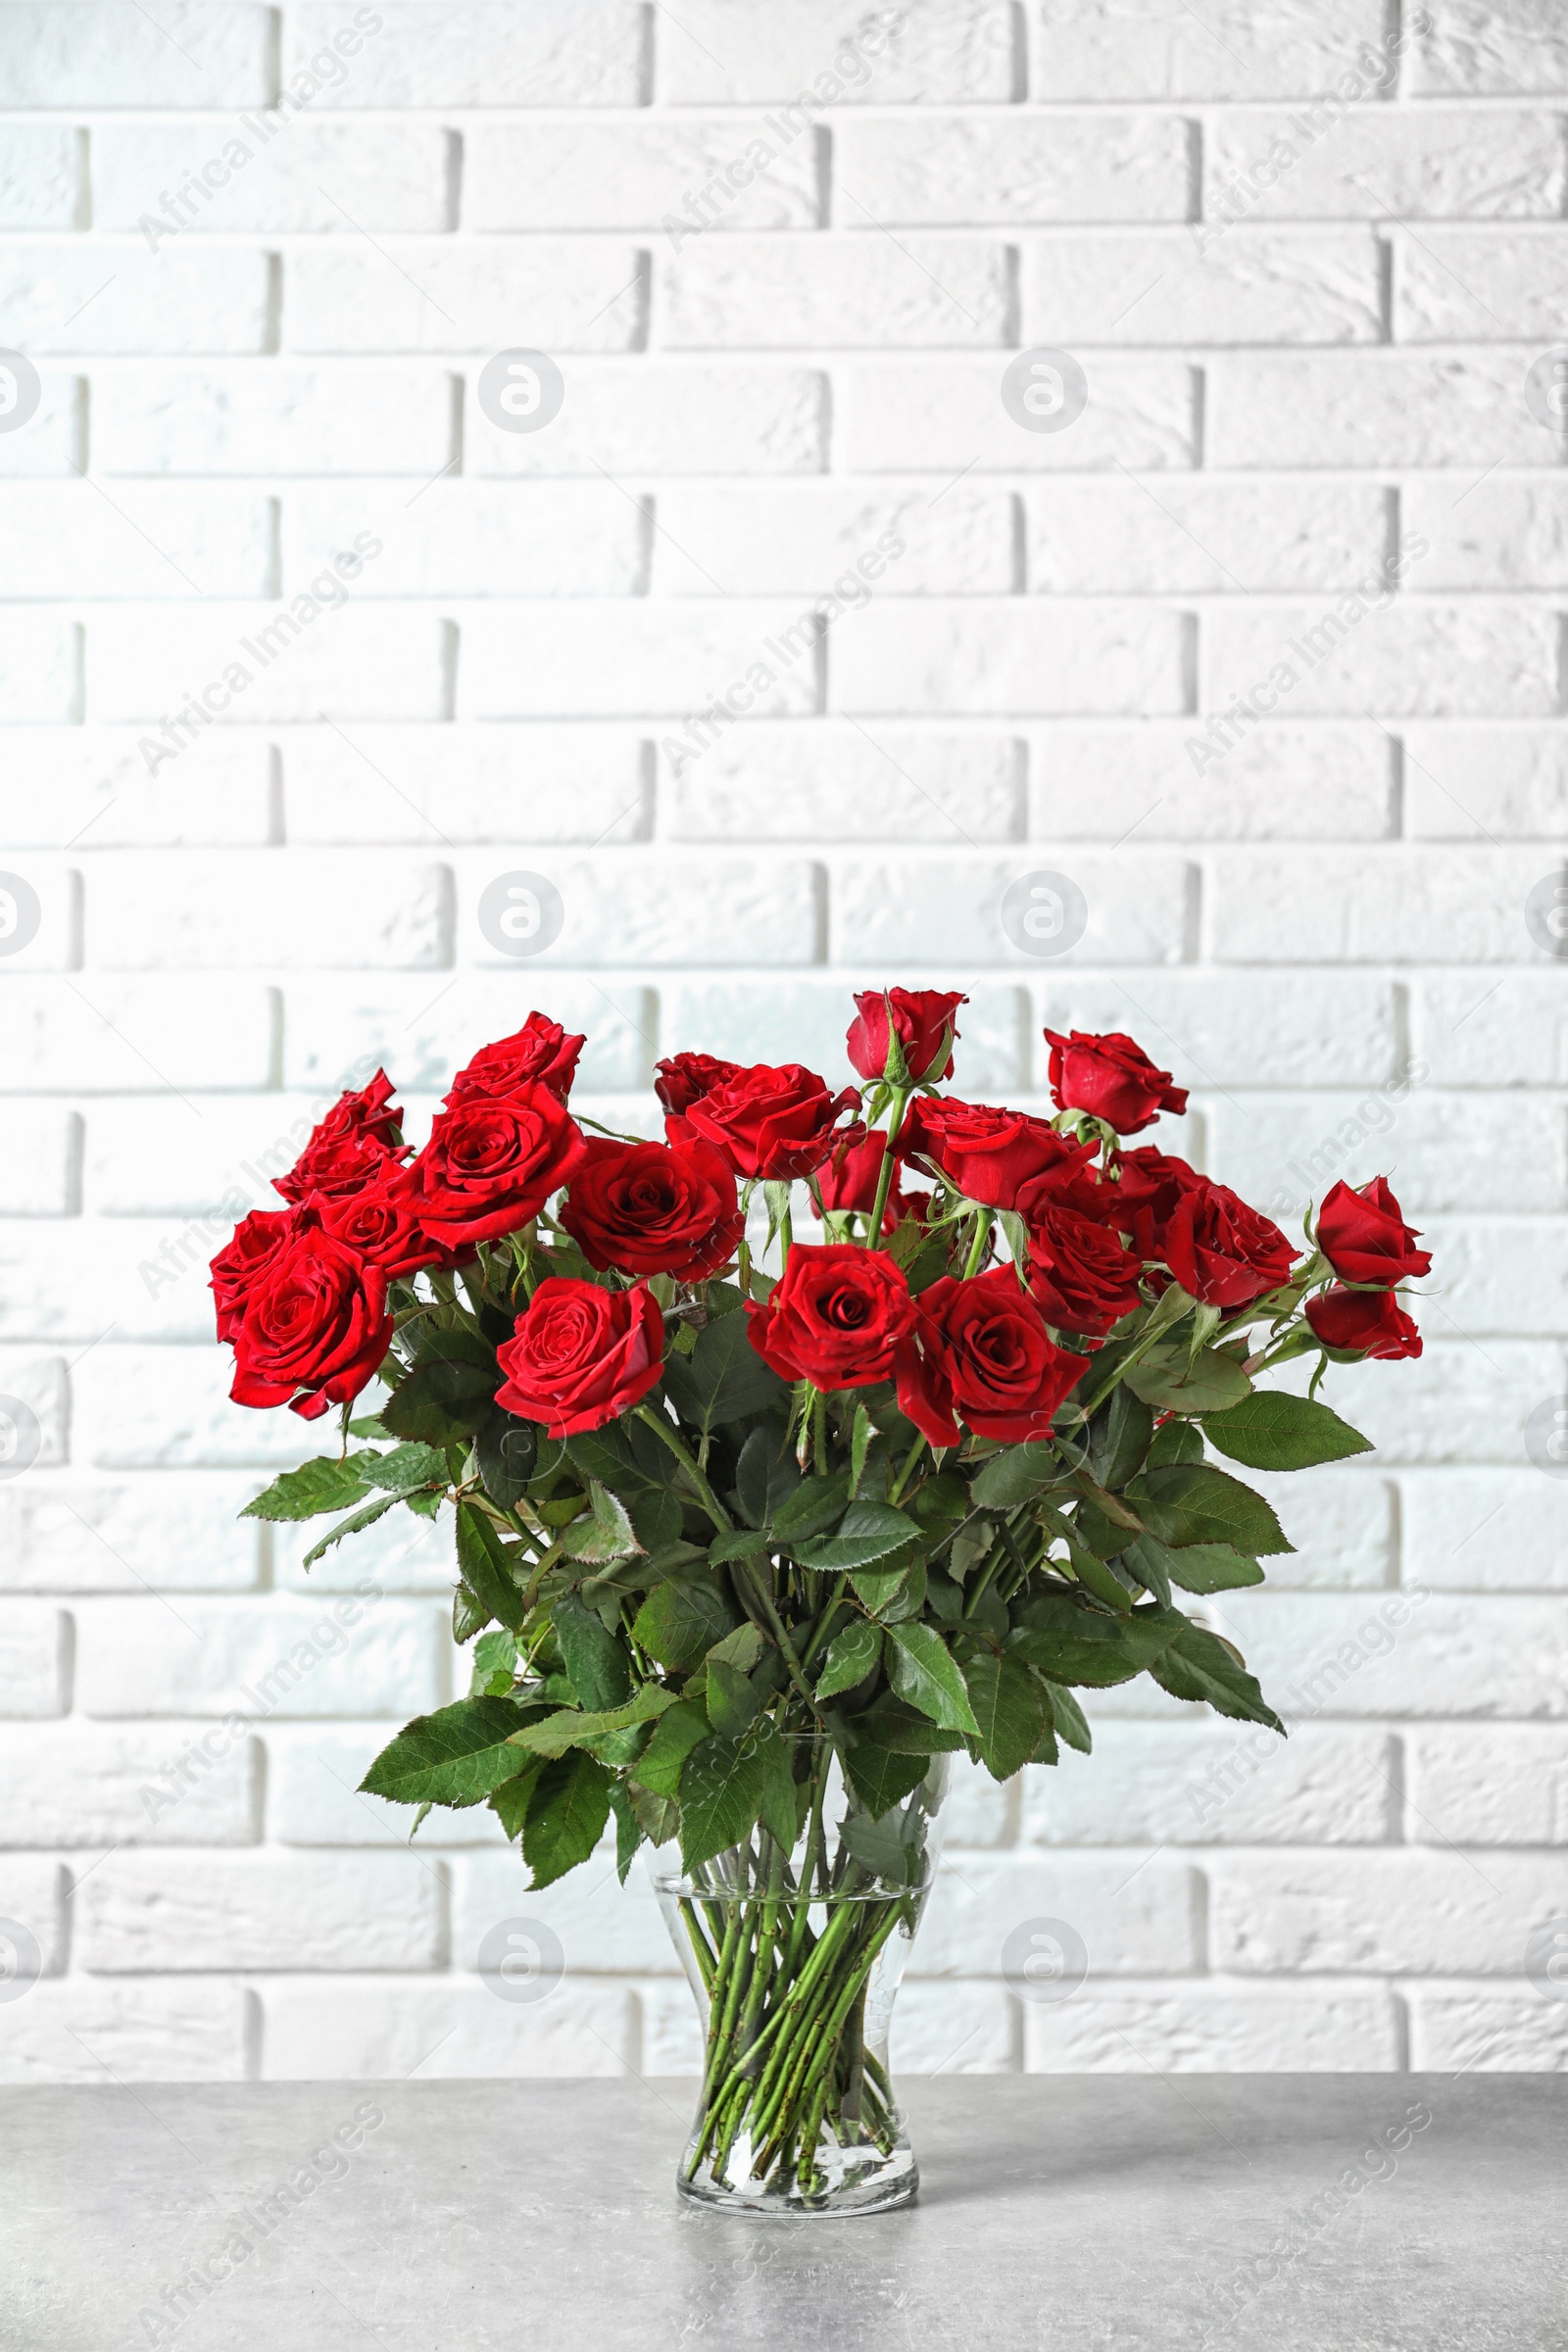 Photo of Vase with beautiful red roses on table against brick wall background